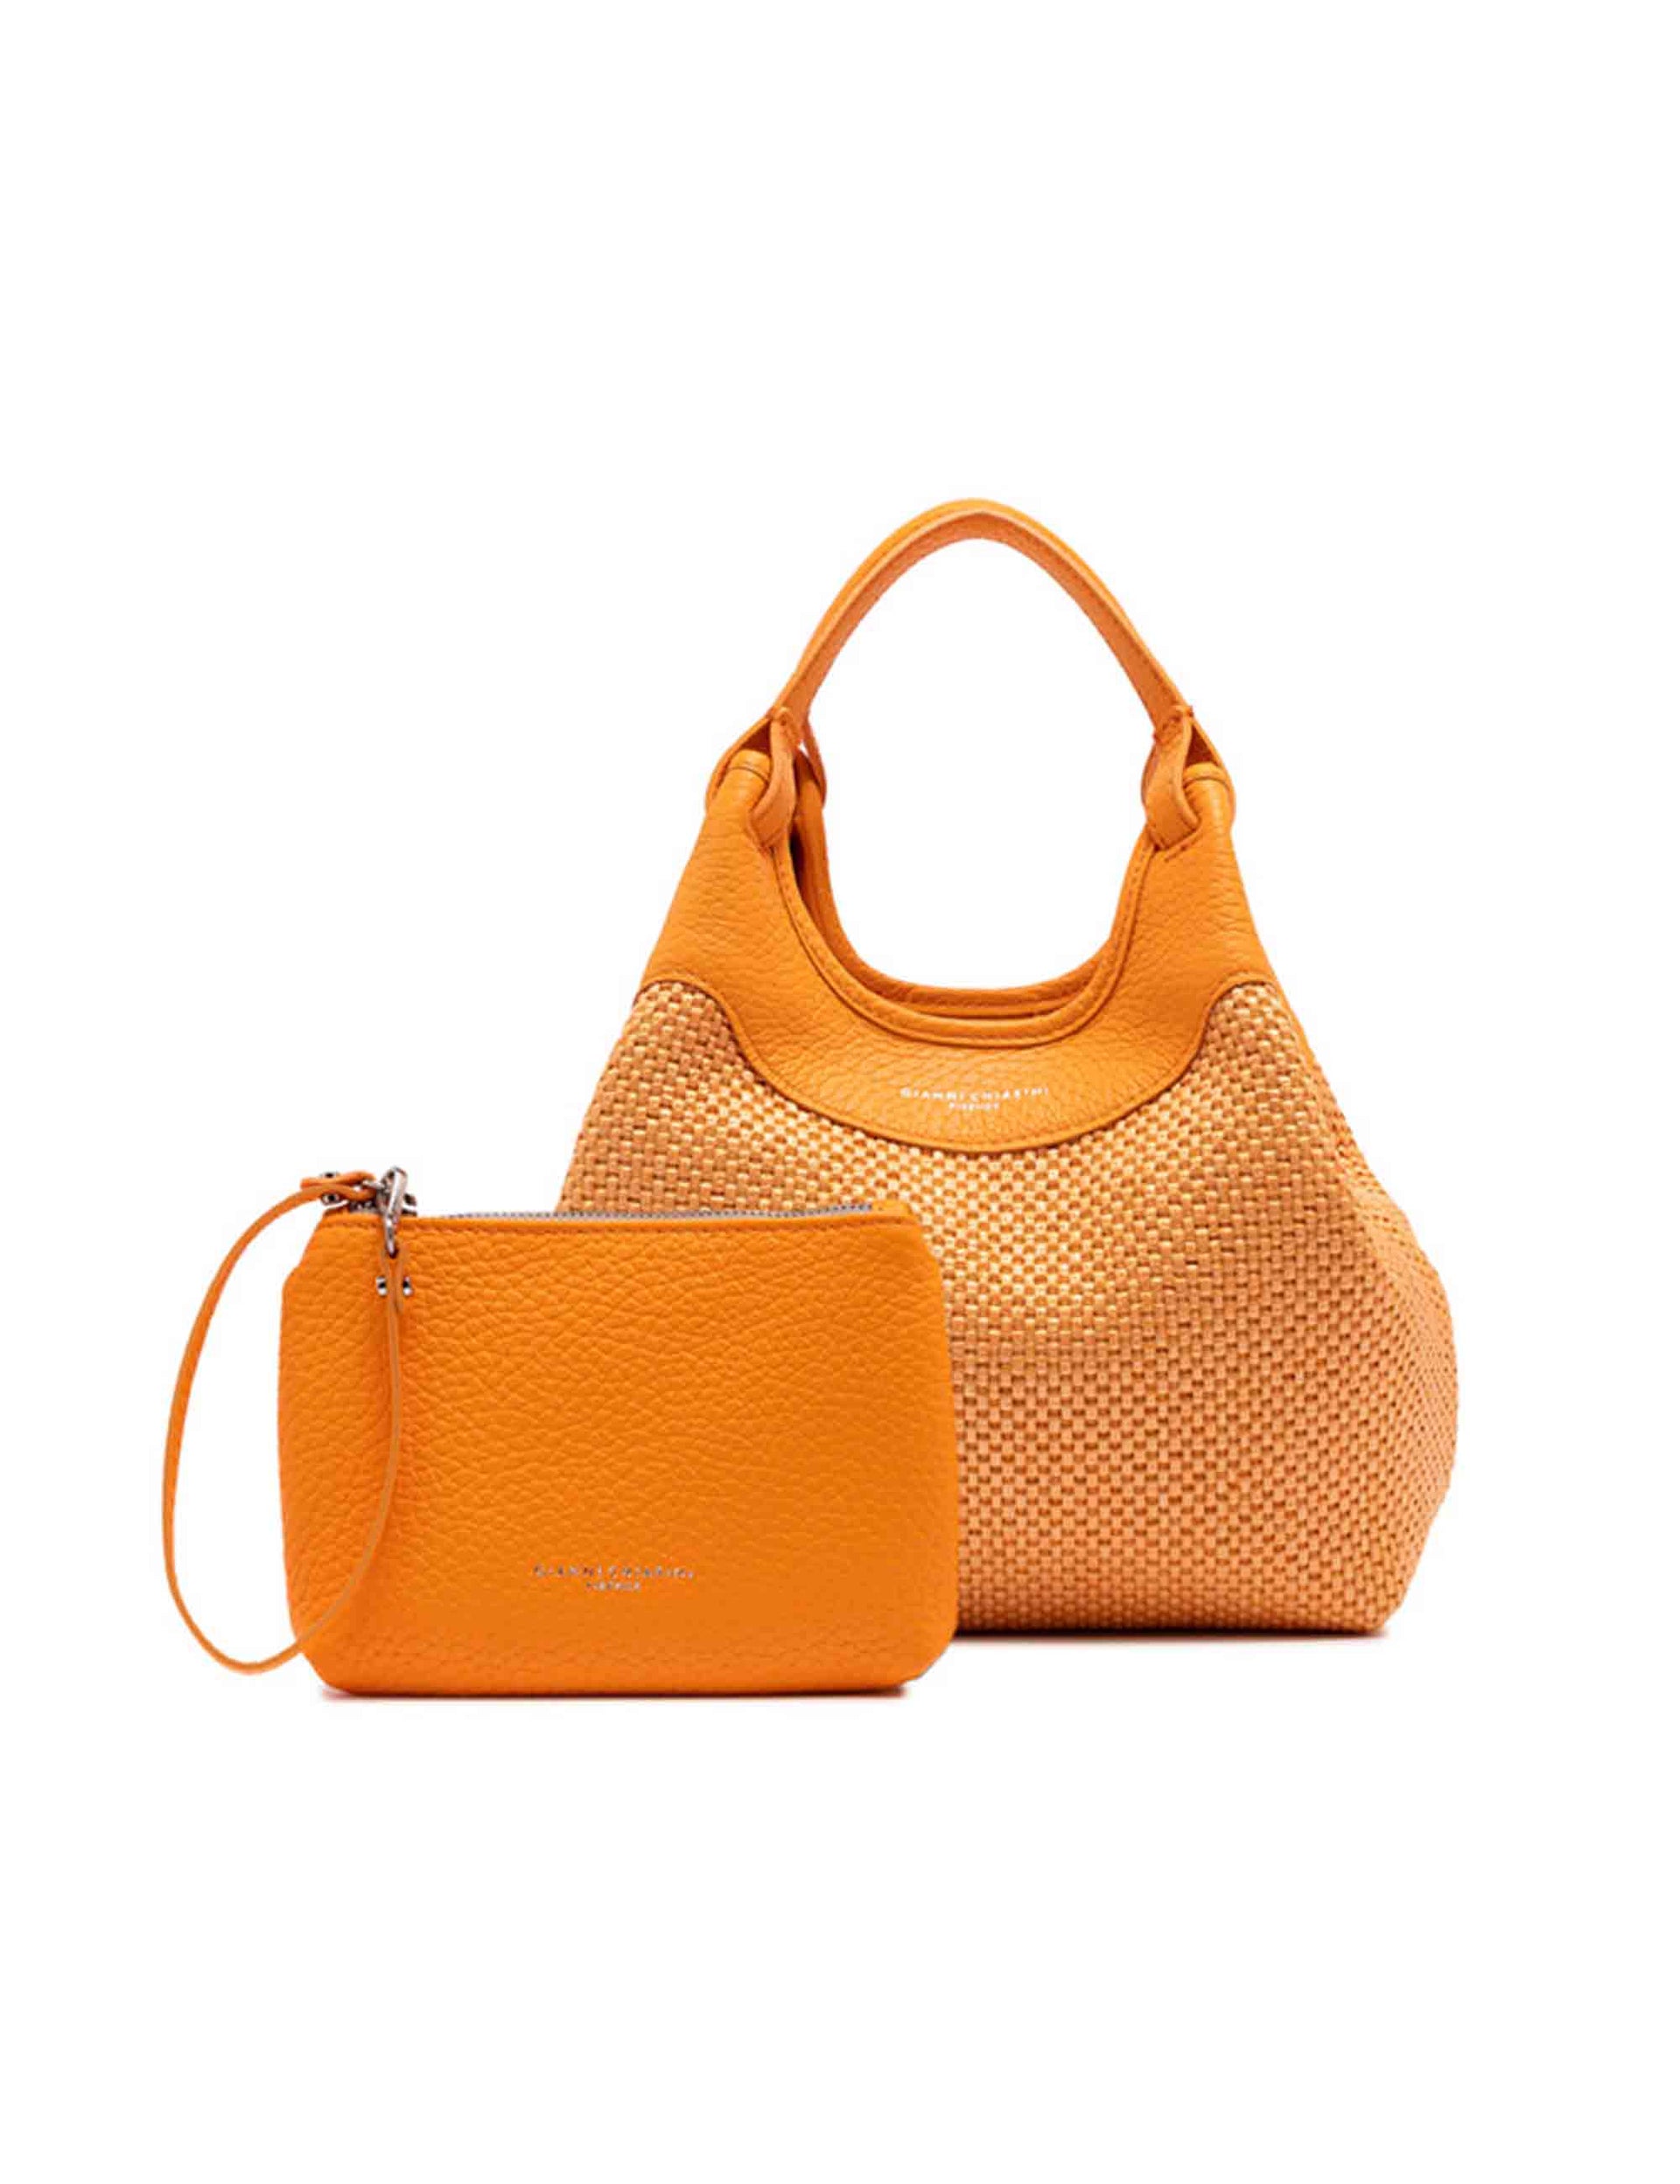 Dua women's shoulder bags in orange leather and fabric with mini clutch bag